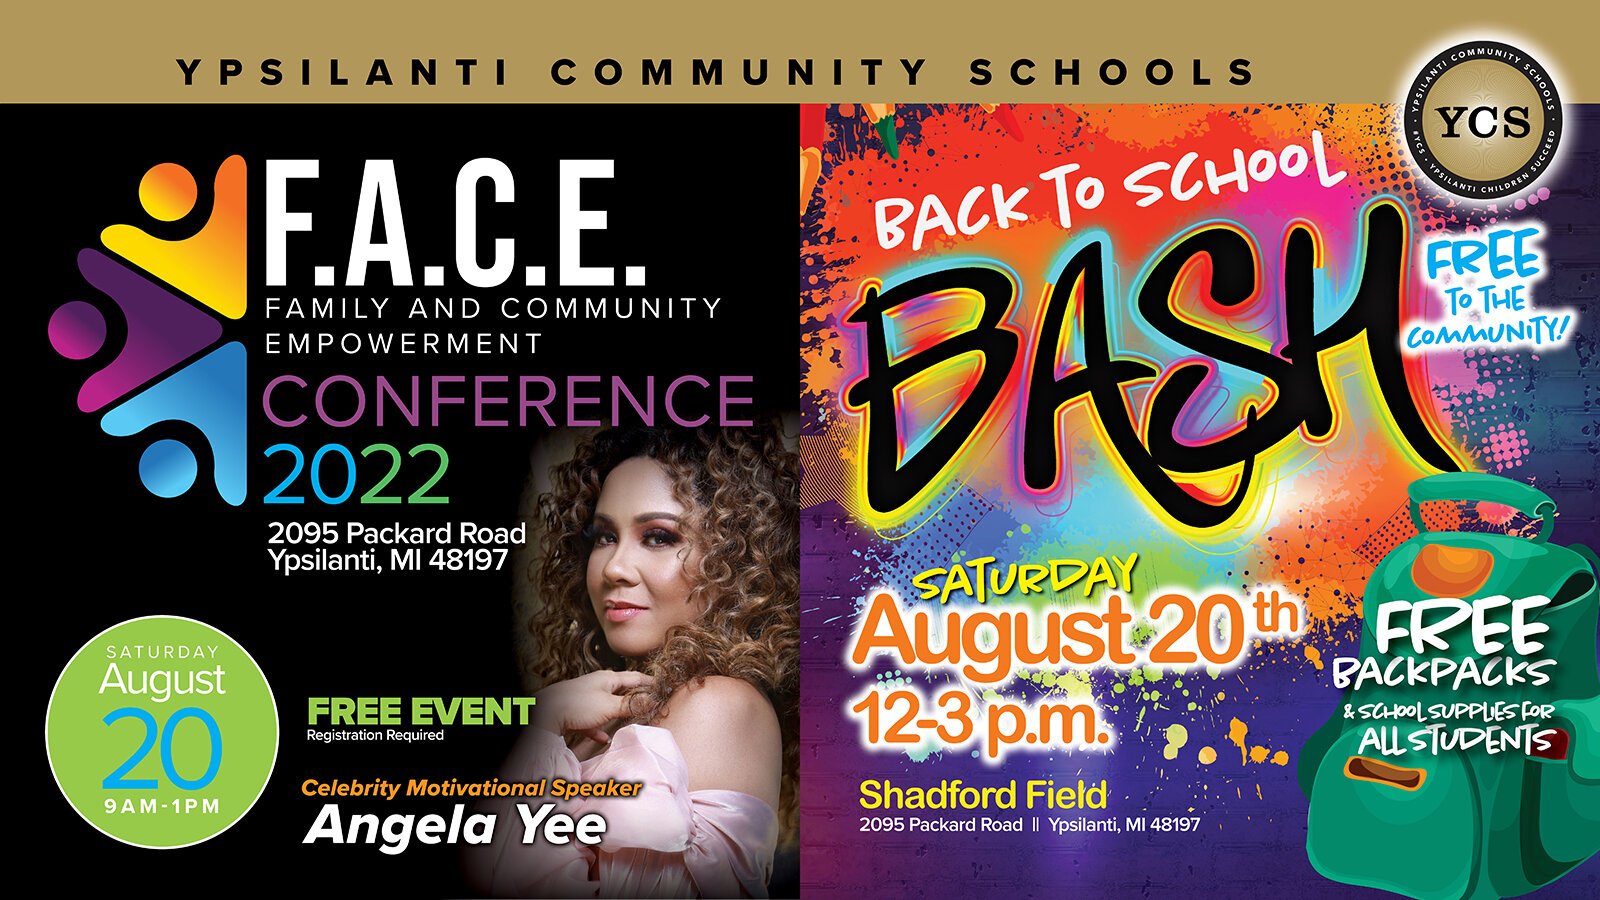 A flyer for the FACE conference and Back to School Bash.